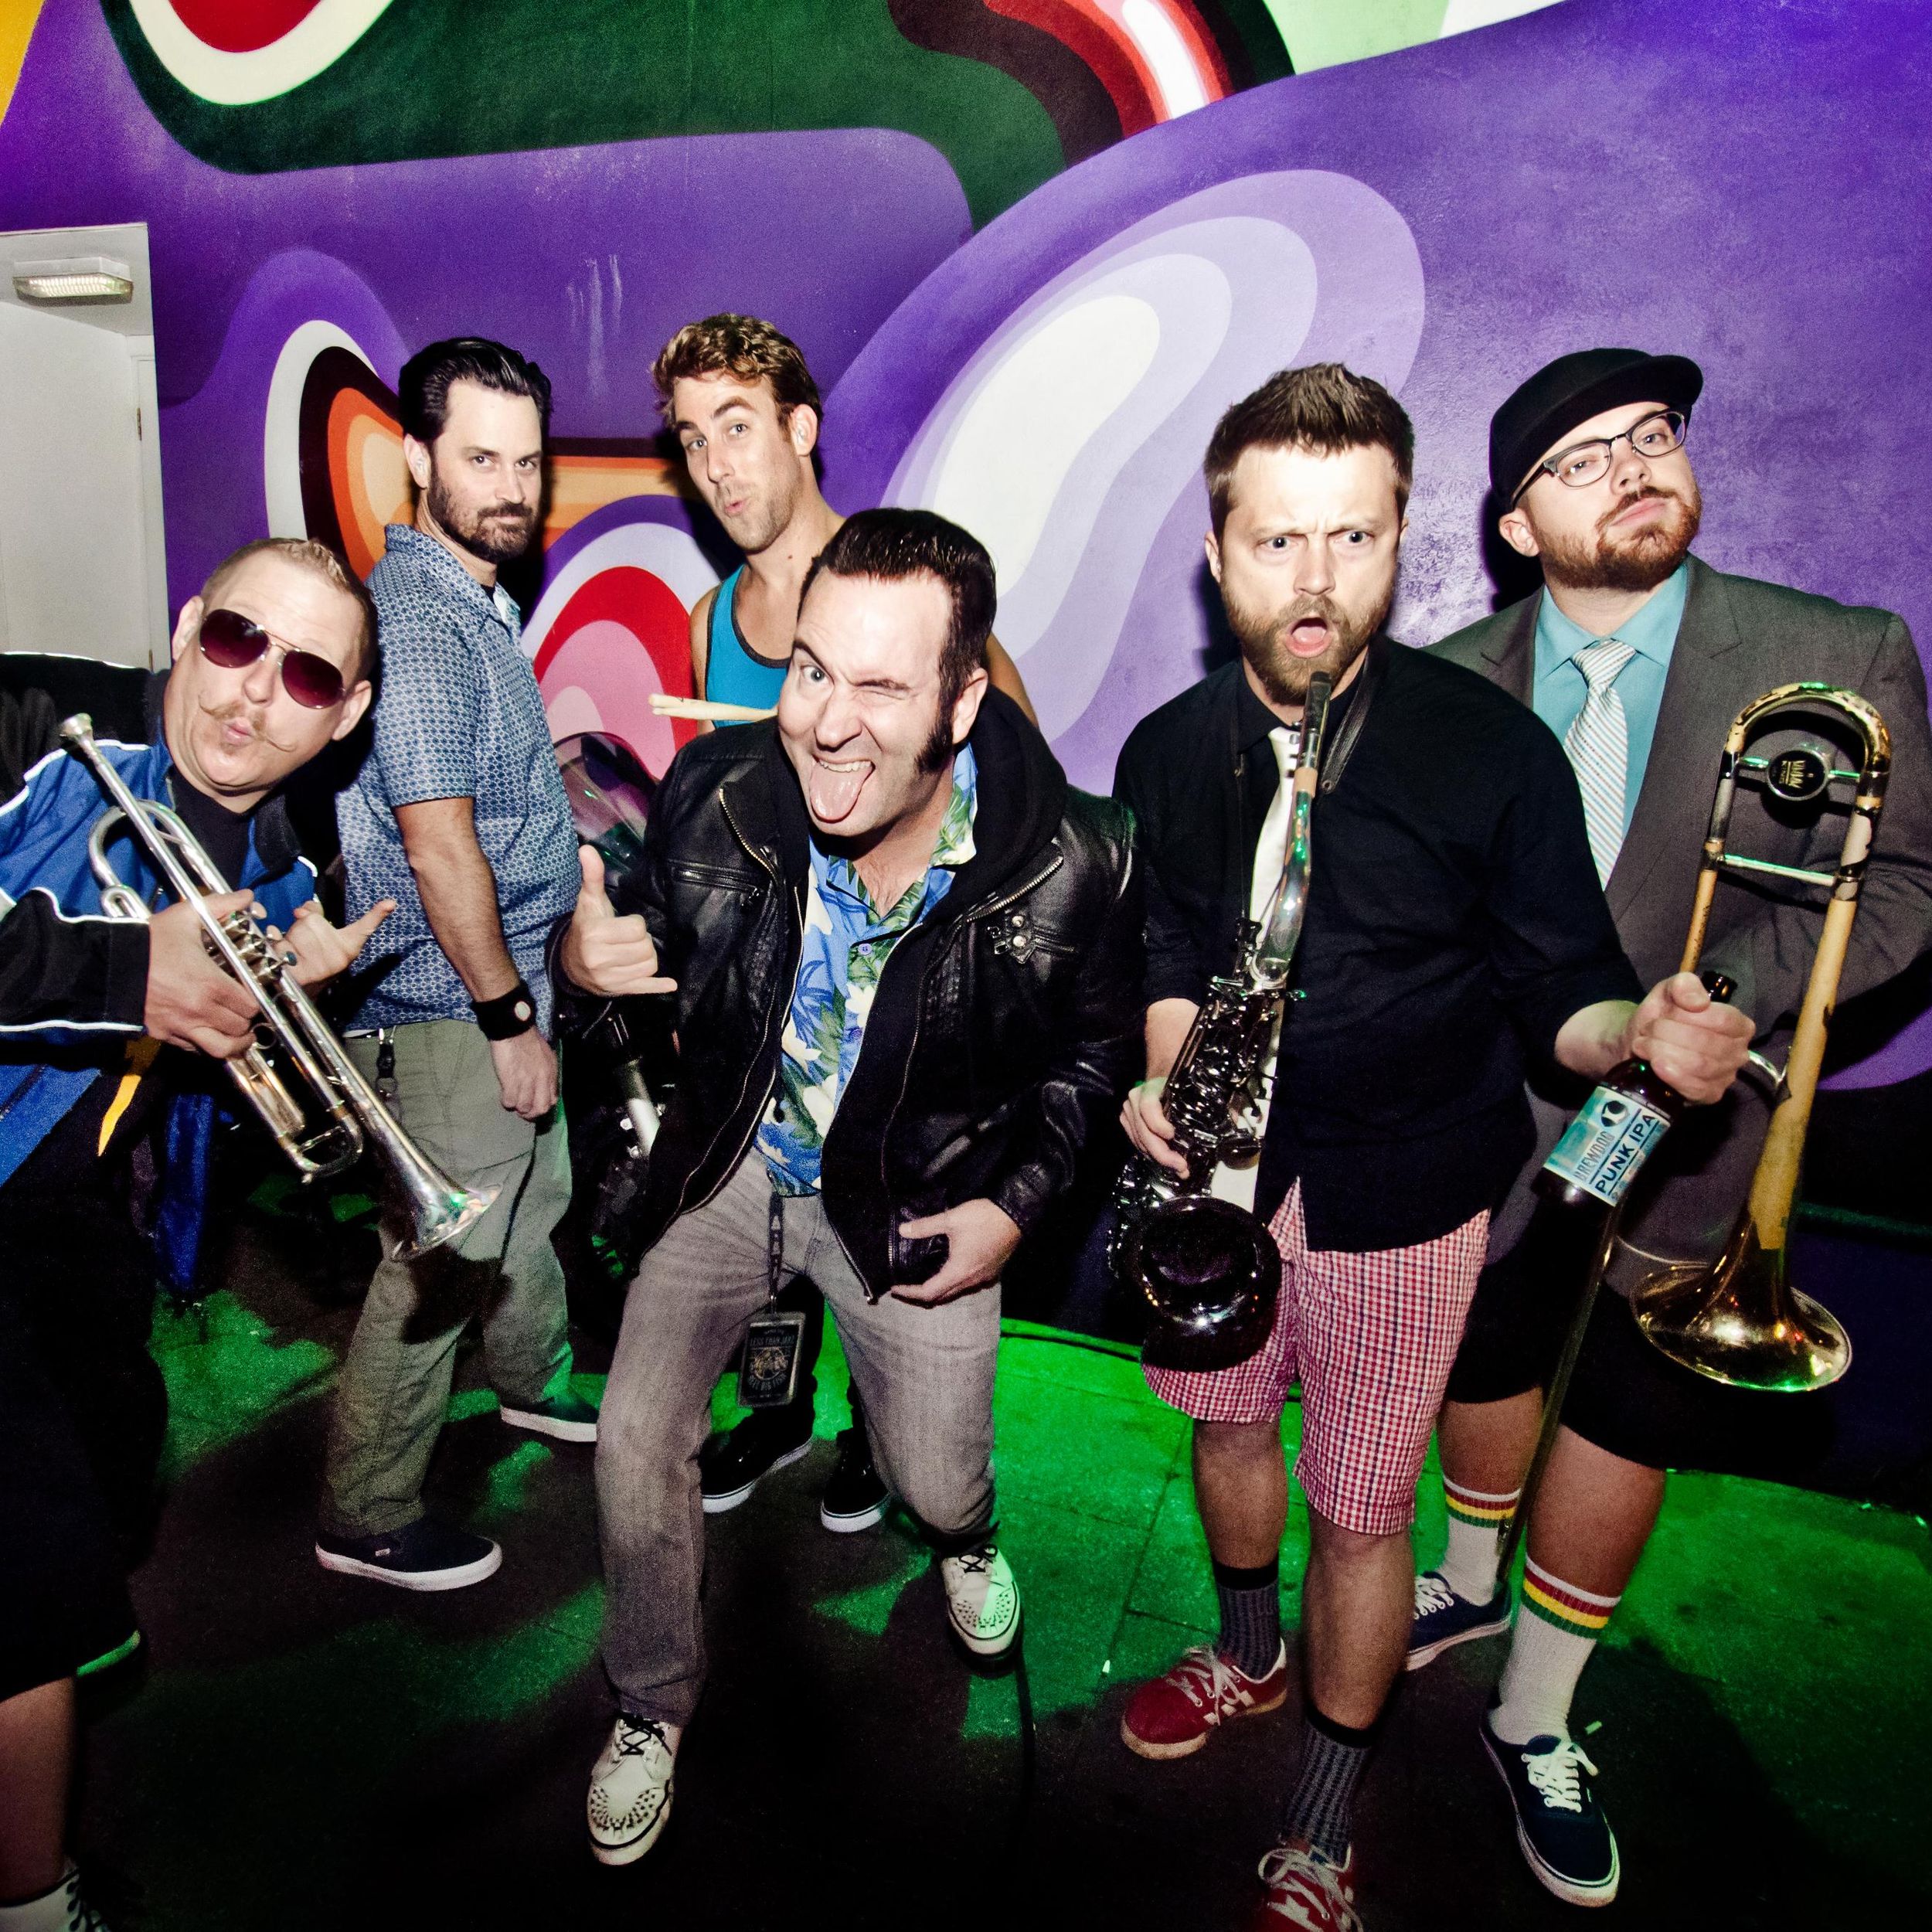 One thing we - The Originals: A Reel Big Fish Cover Band?